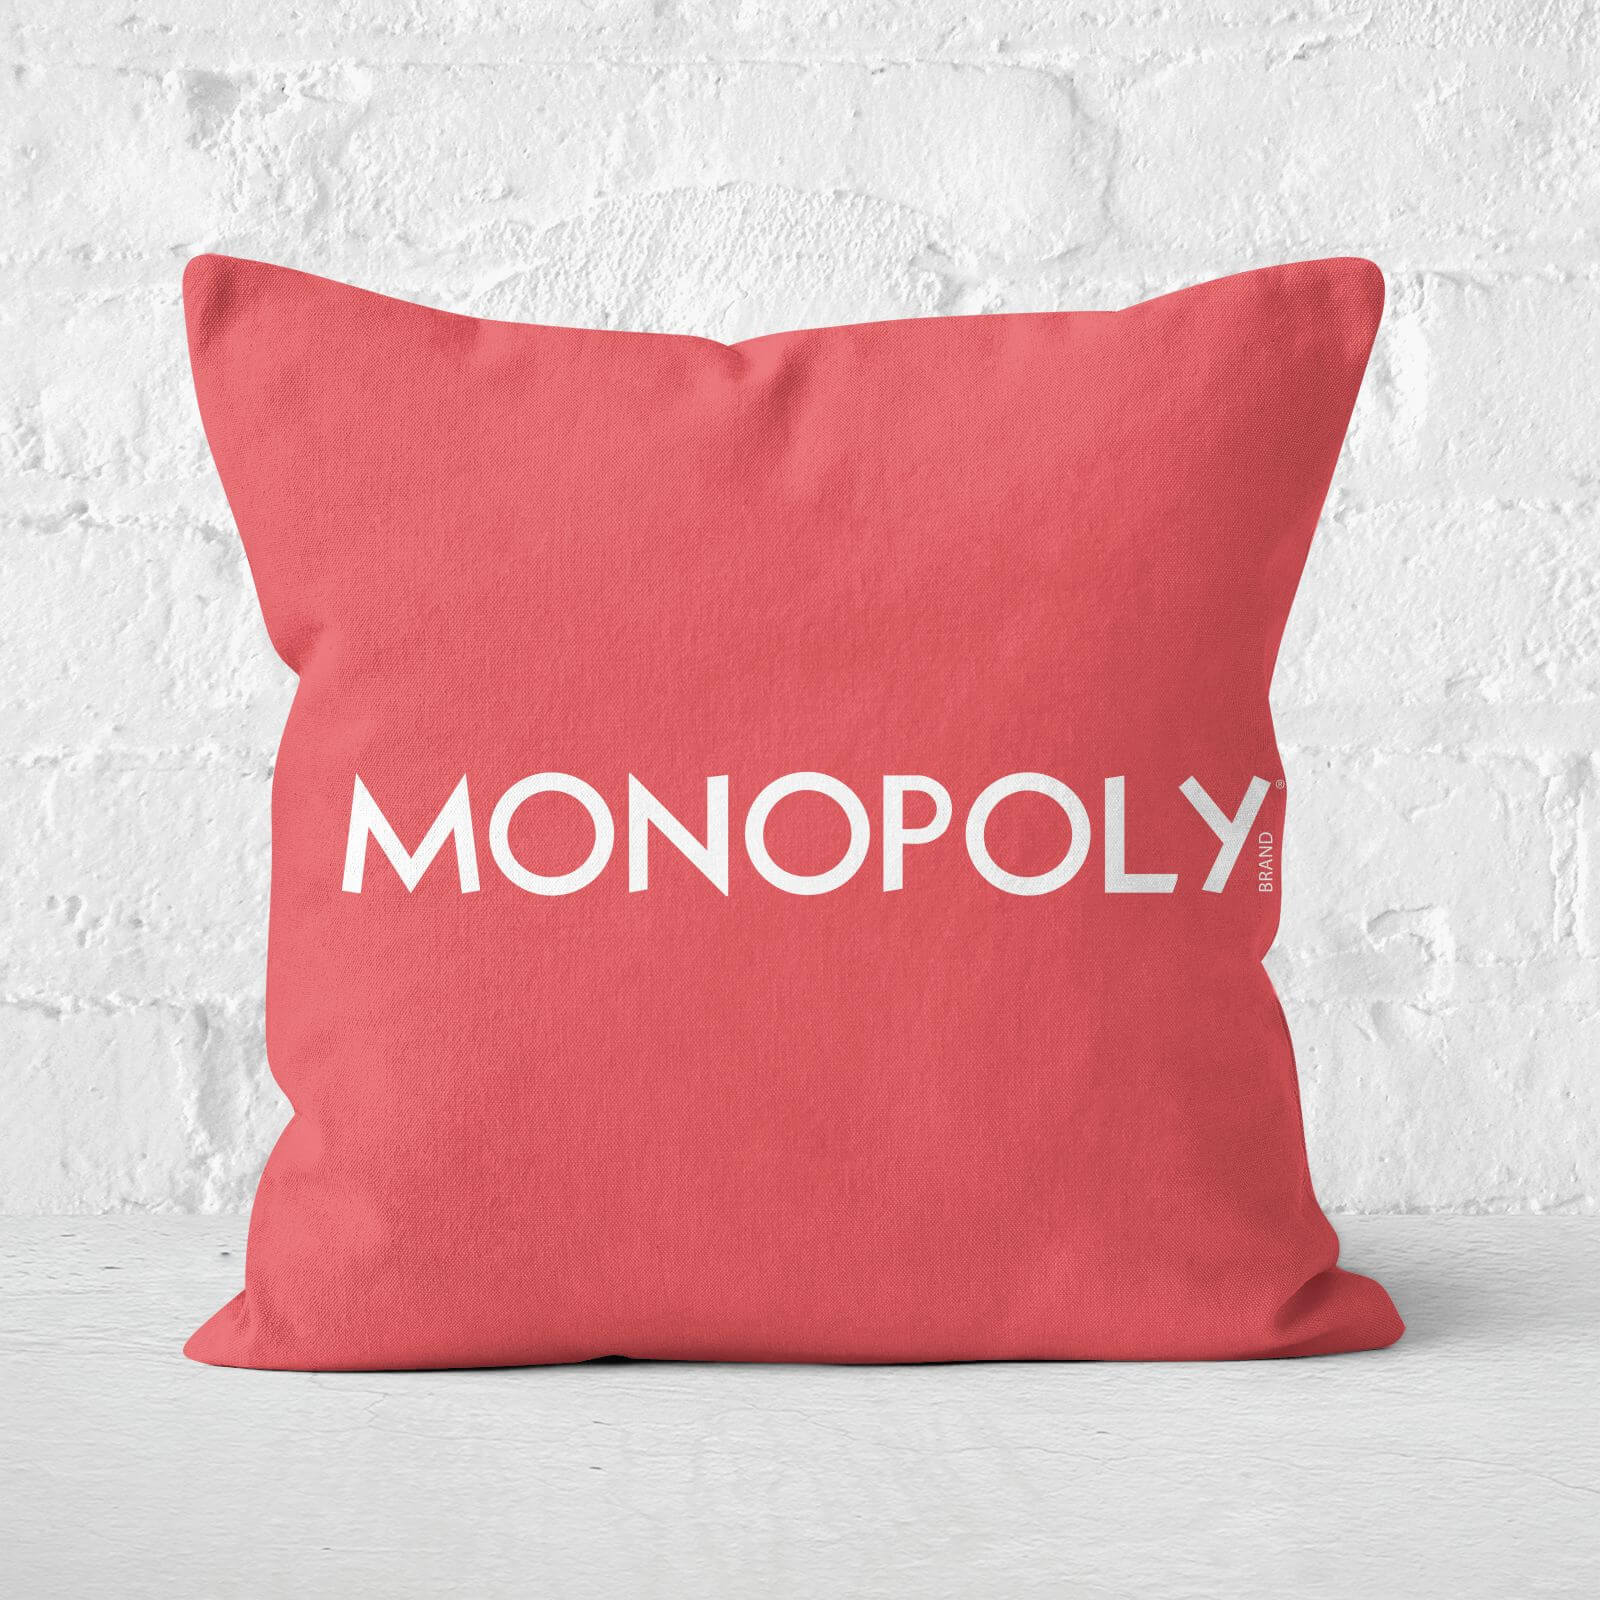 Monopoly Pattern Square Cushion - 40x40cm - Soft Touch